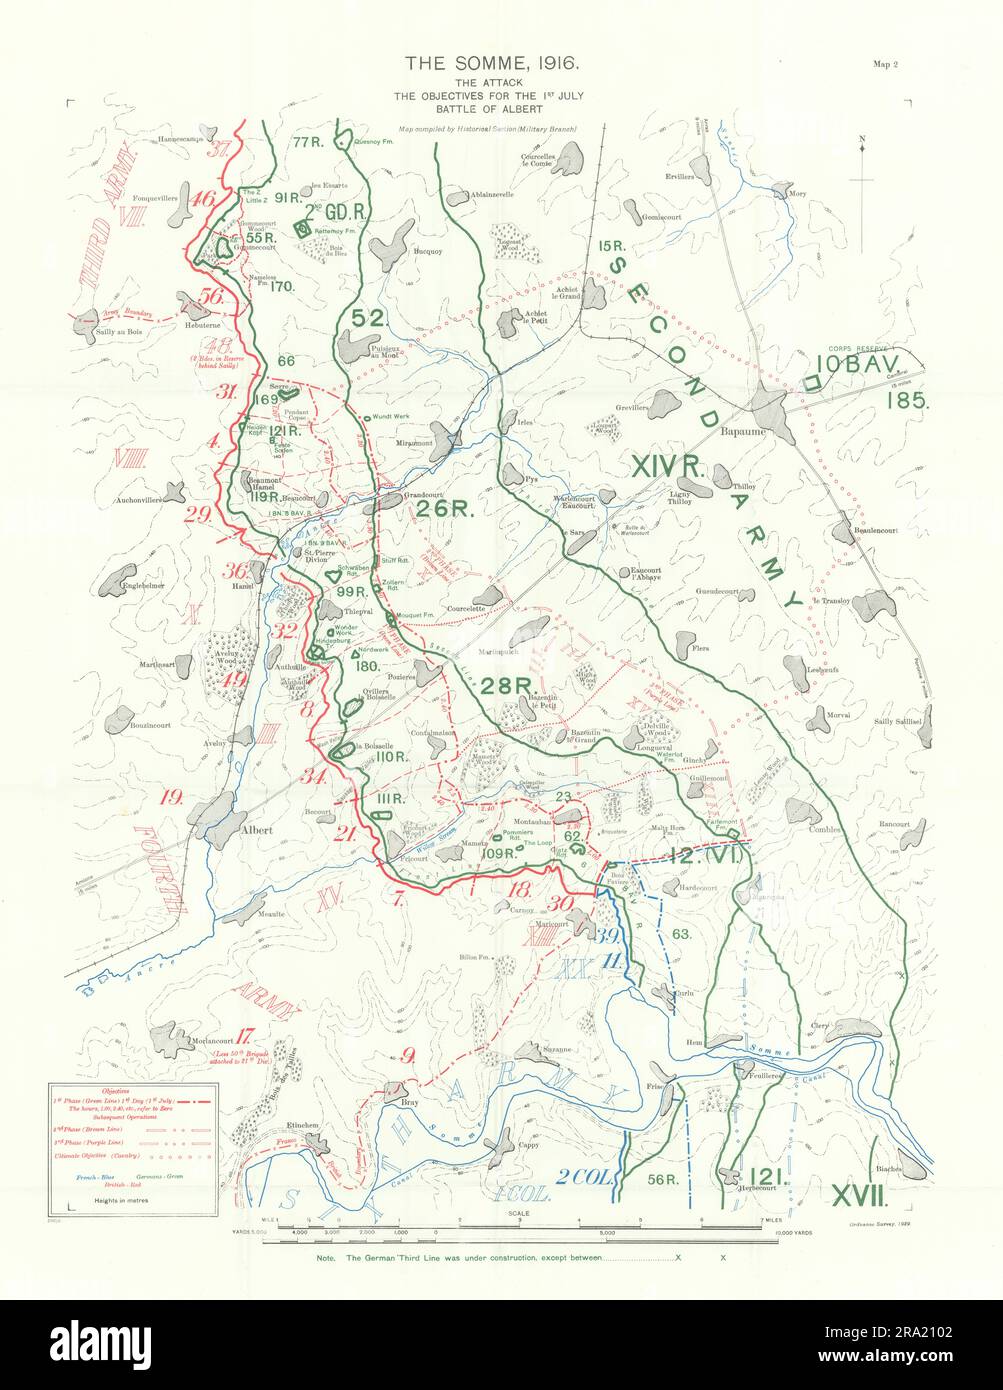 Somme, 1st July 1916. Attack & Objectives, Battle of Albert. Trenches 1932 map Stock Photo